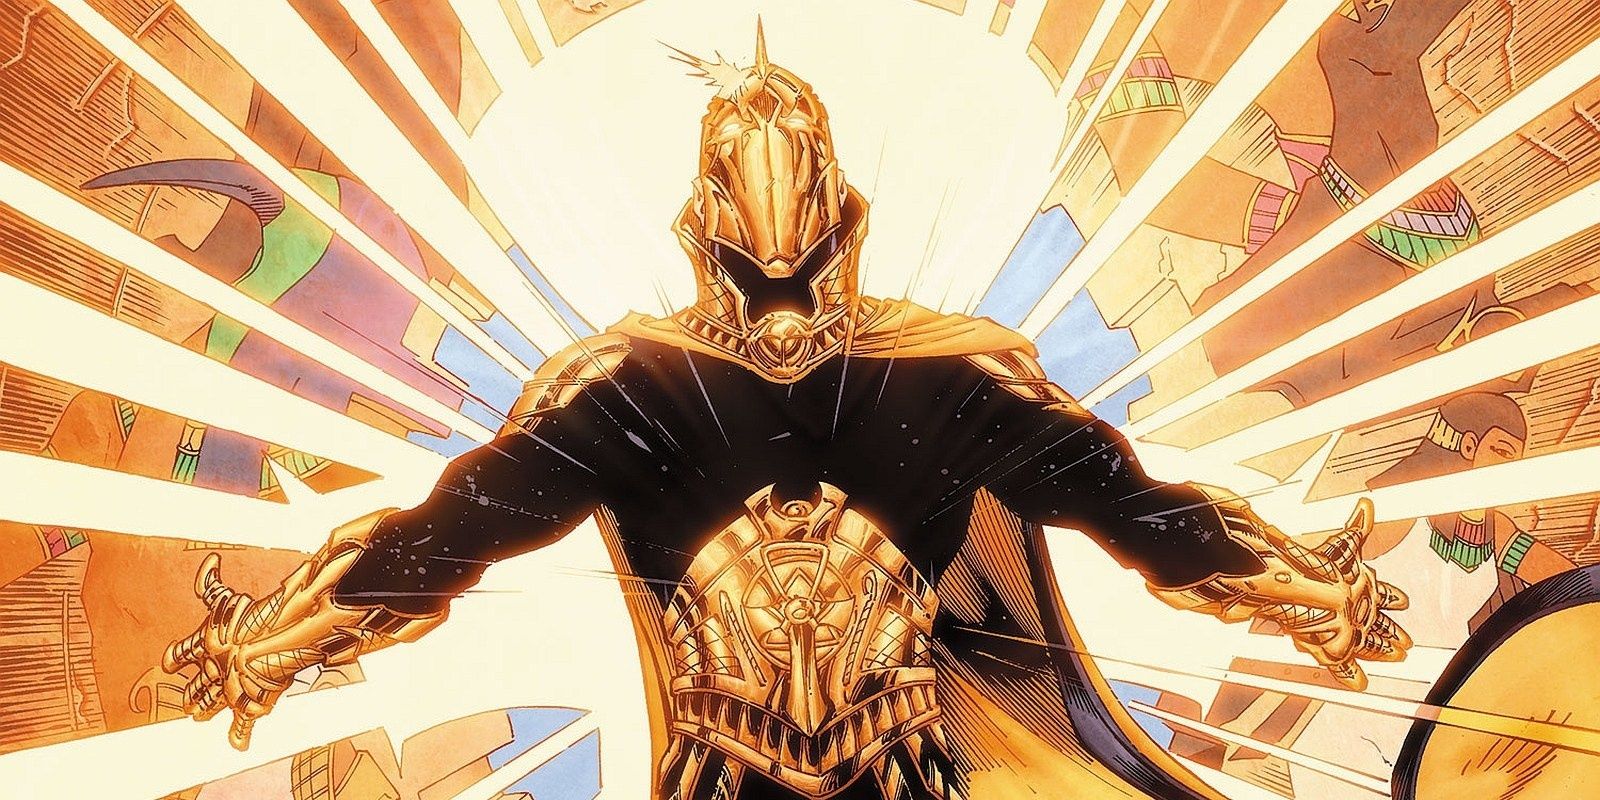 Doctor Fate using his powerful magical abilities